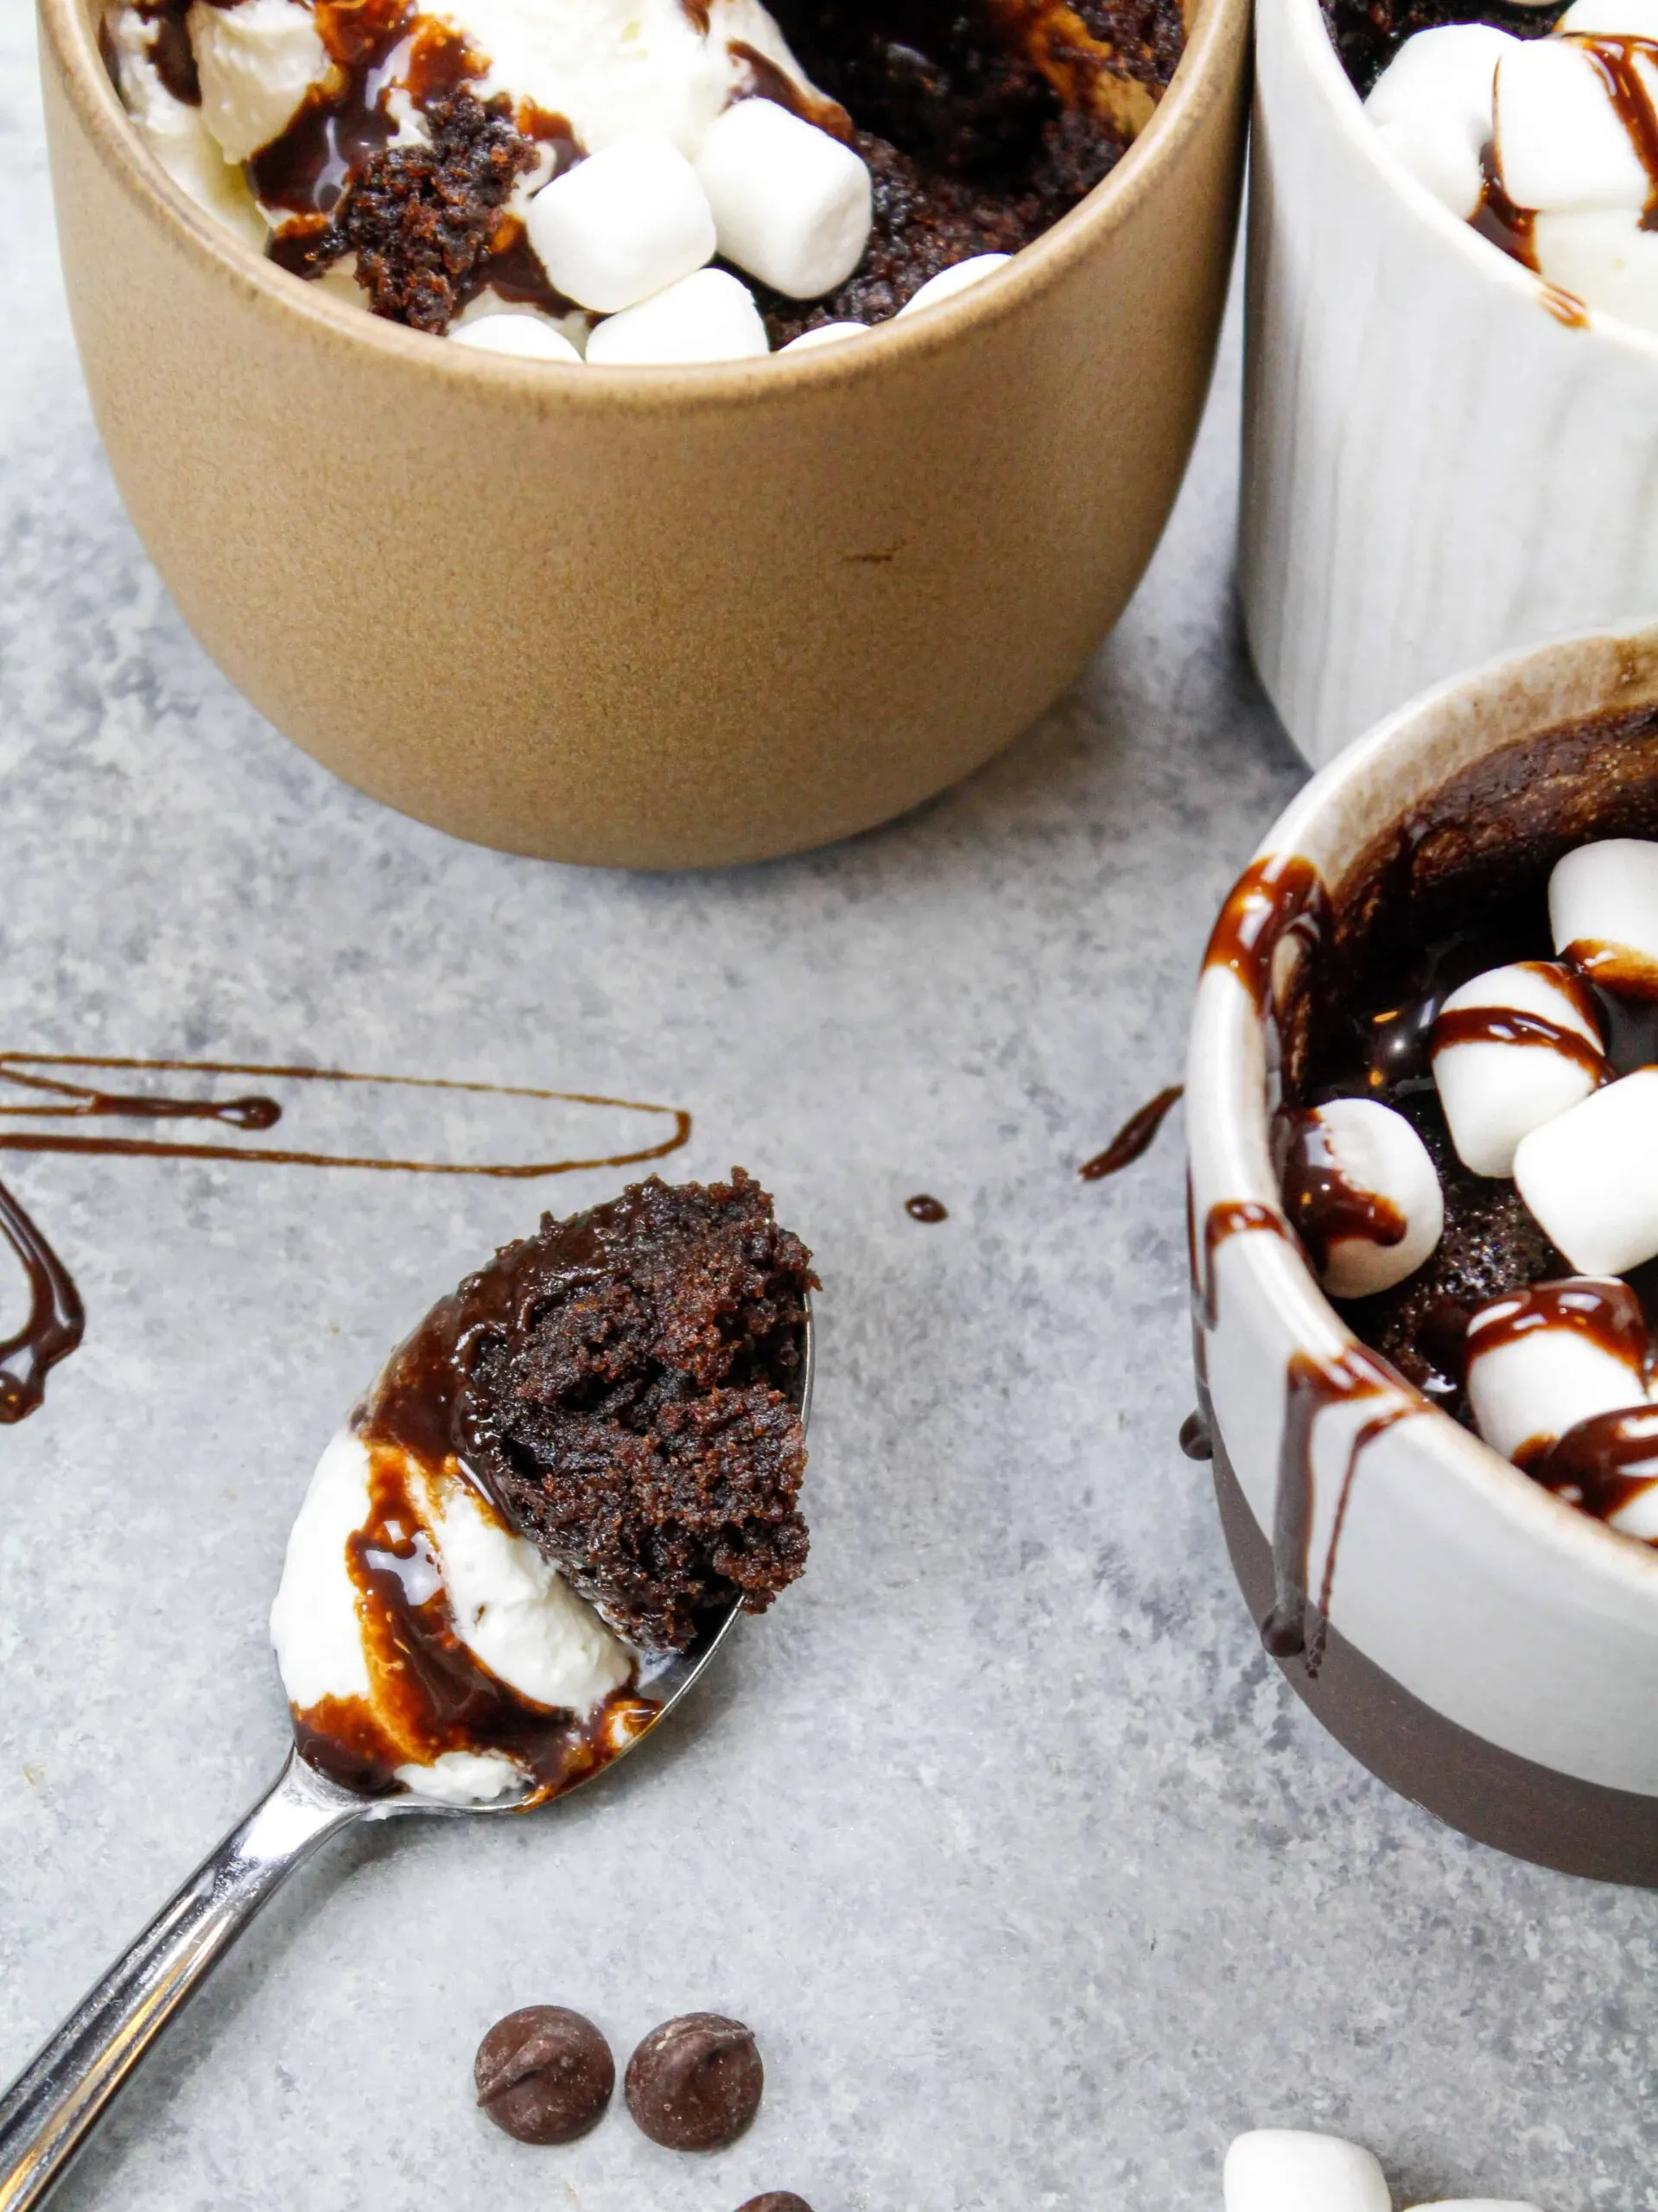 image of hot cocoa mug cake with spoonful scooped out to show how moist and fluffy the cake is